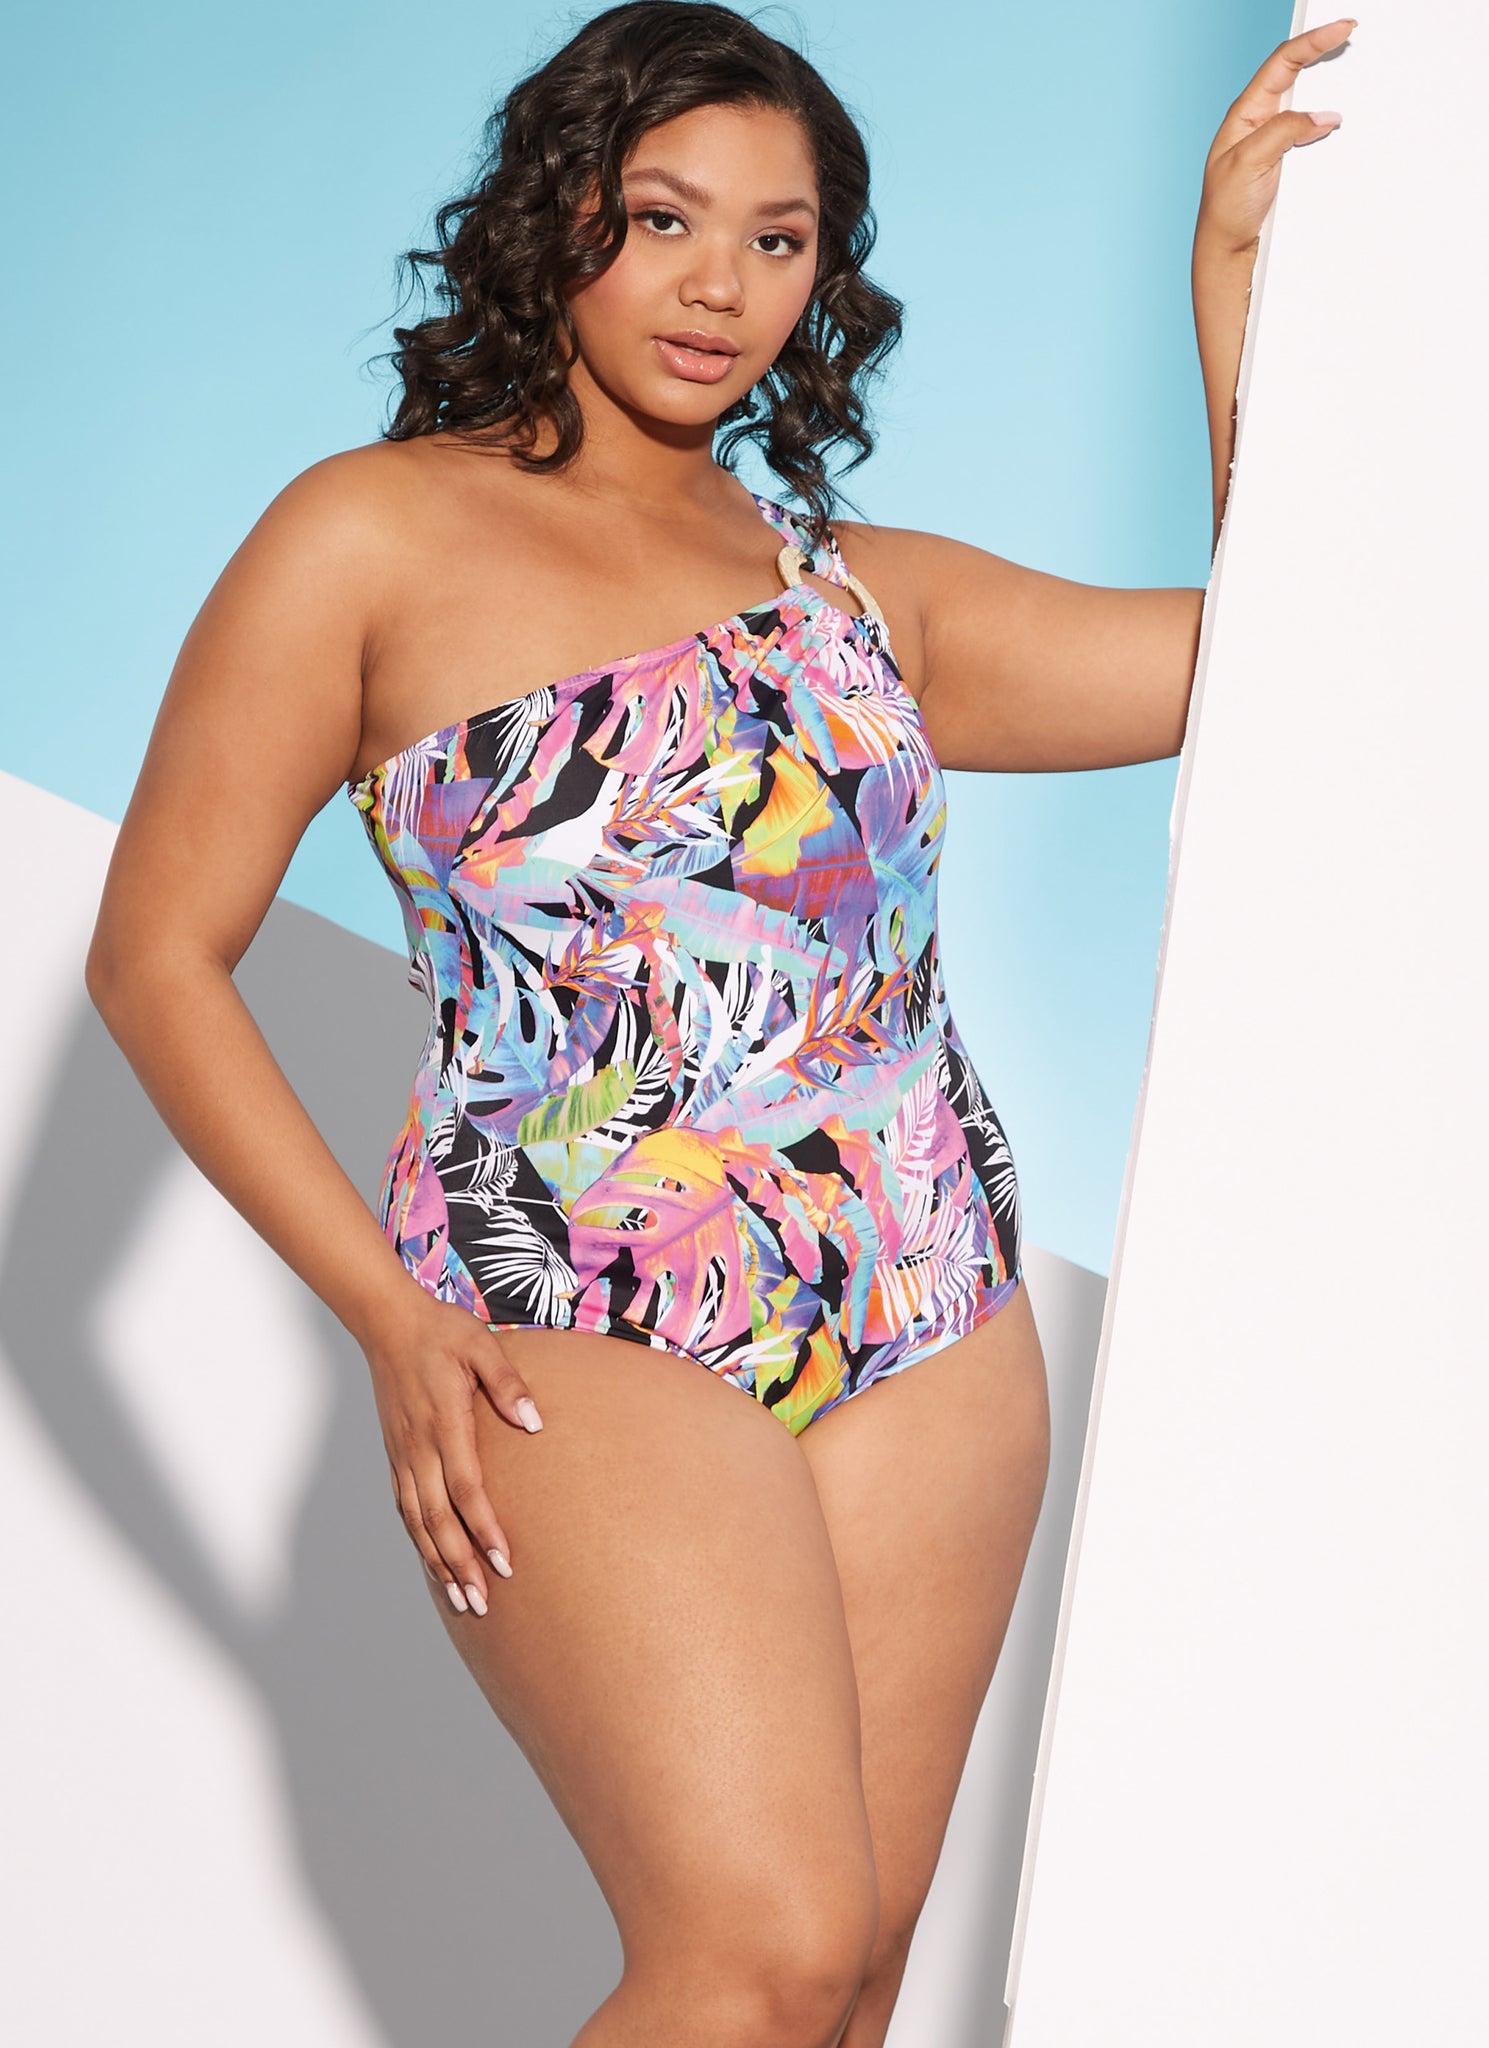 V9192 Misses' Wrap-Top Bikini, One-Piece Swimsuits, and Cover-Ups